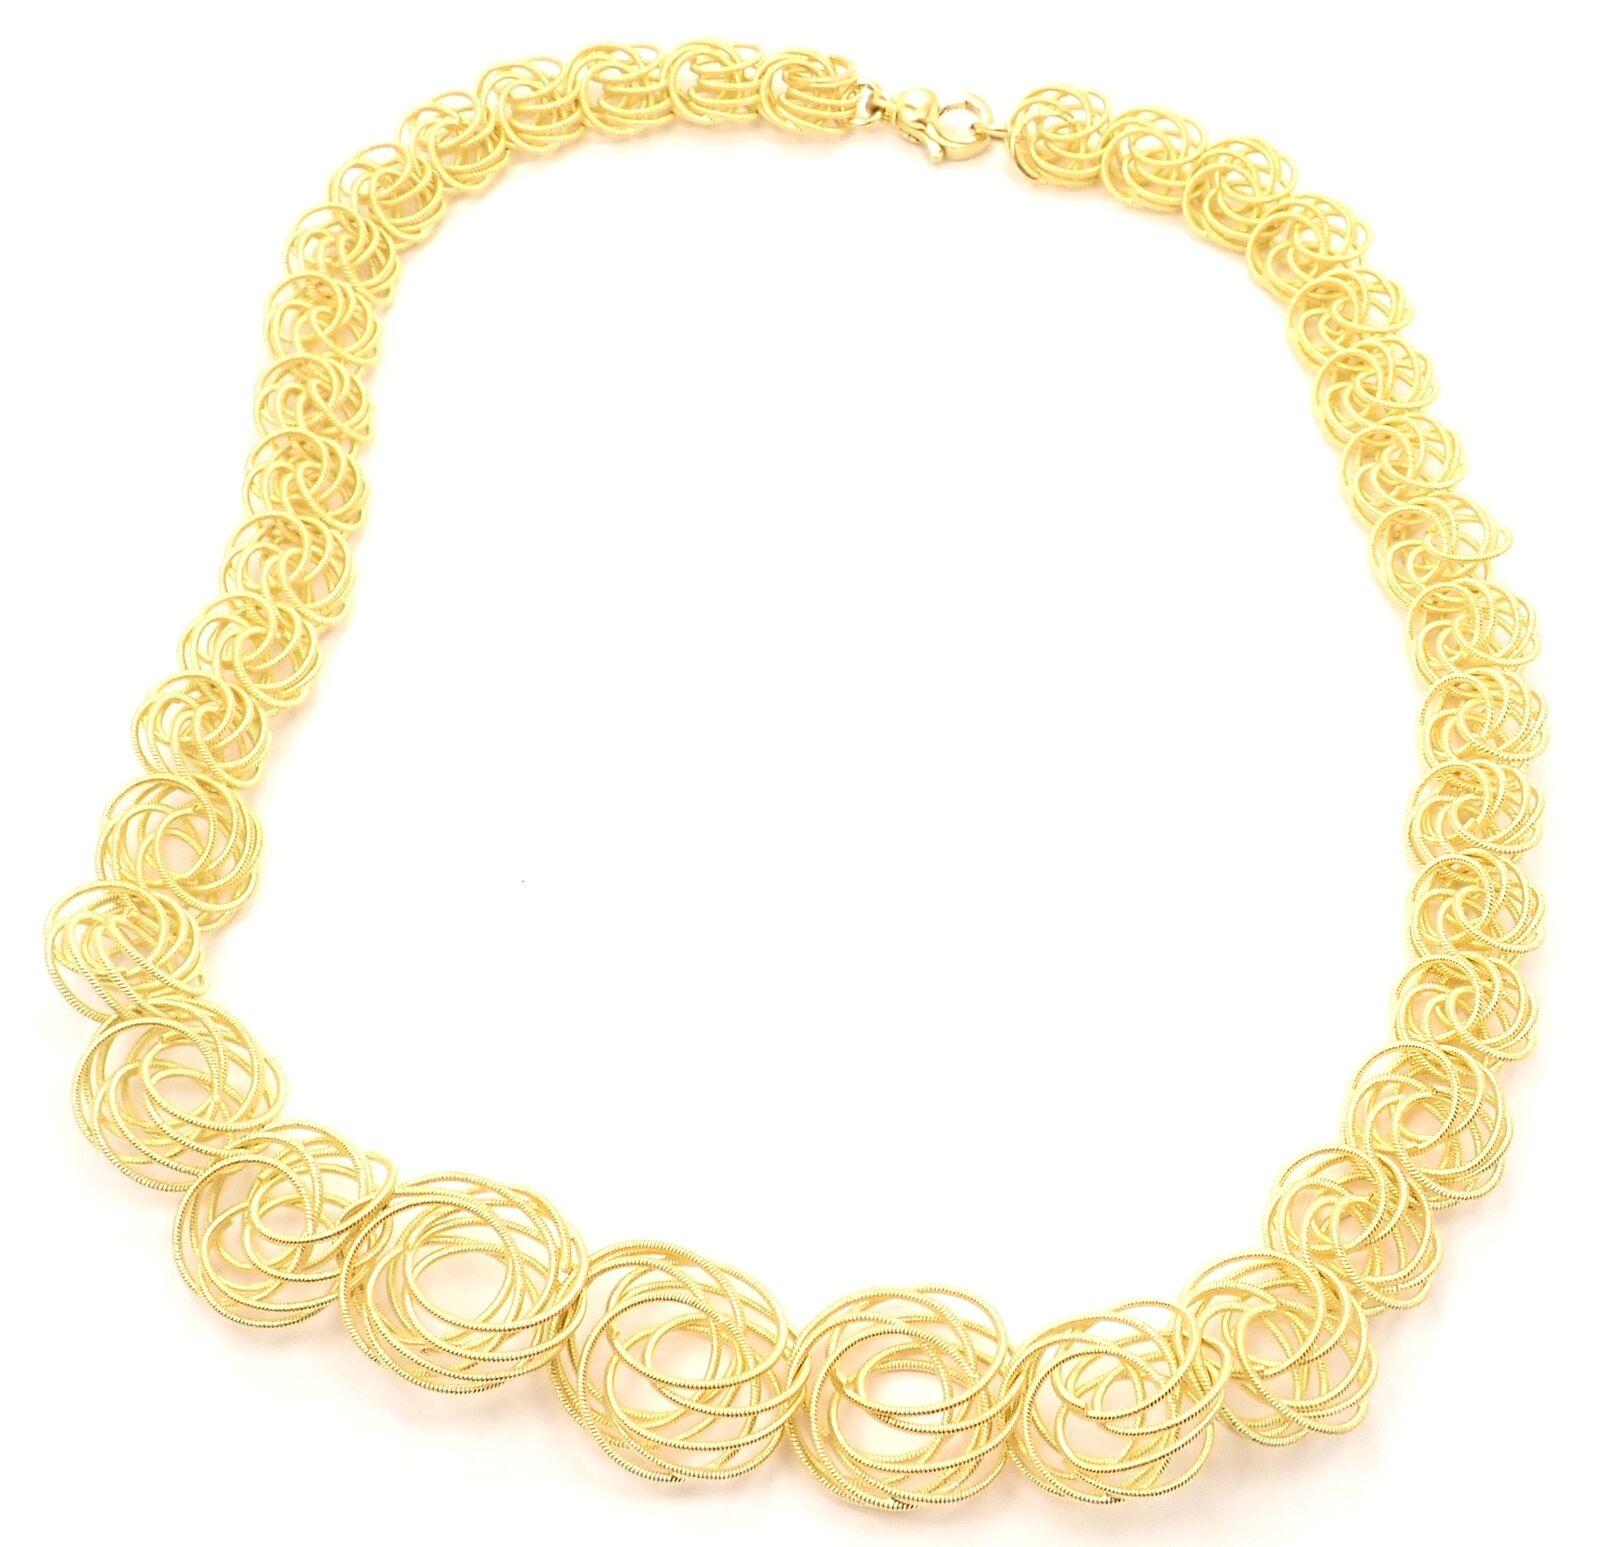 18k Yellow Gold Buccellati Hawaii Wire Graduated 
Details: 
Length: 16.5